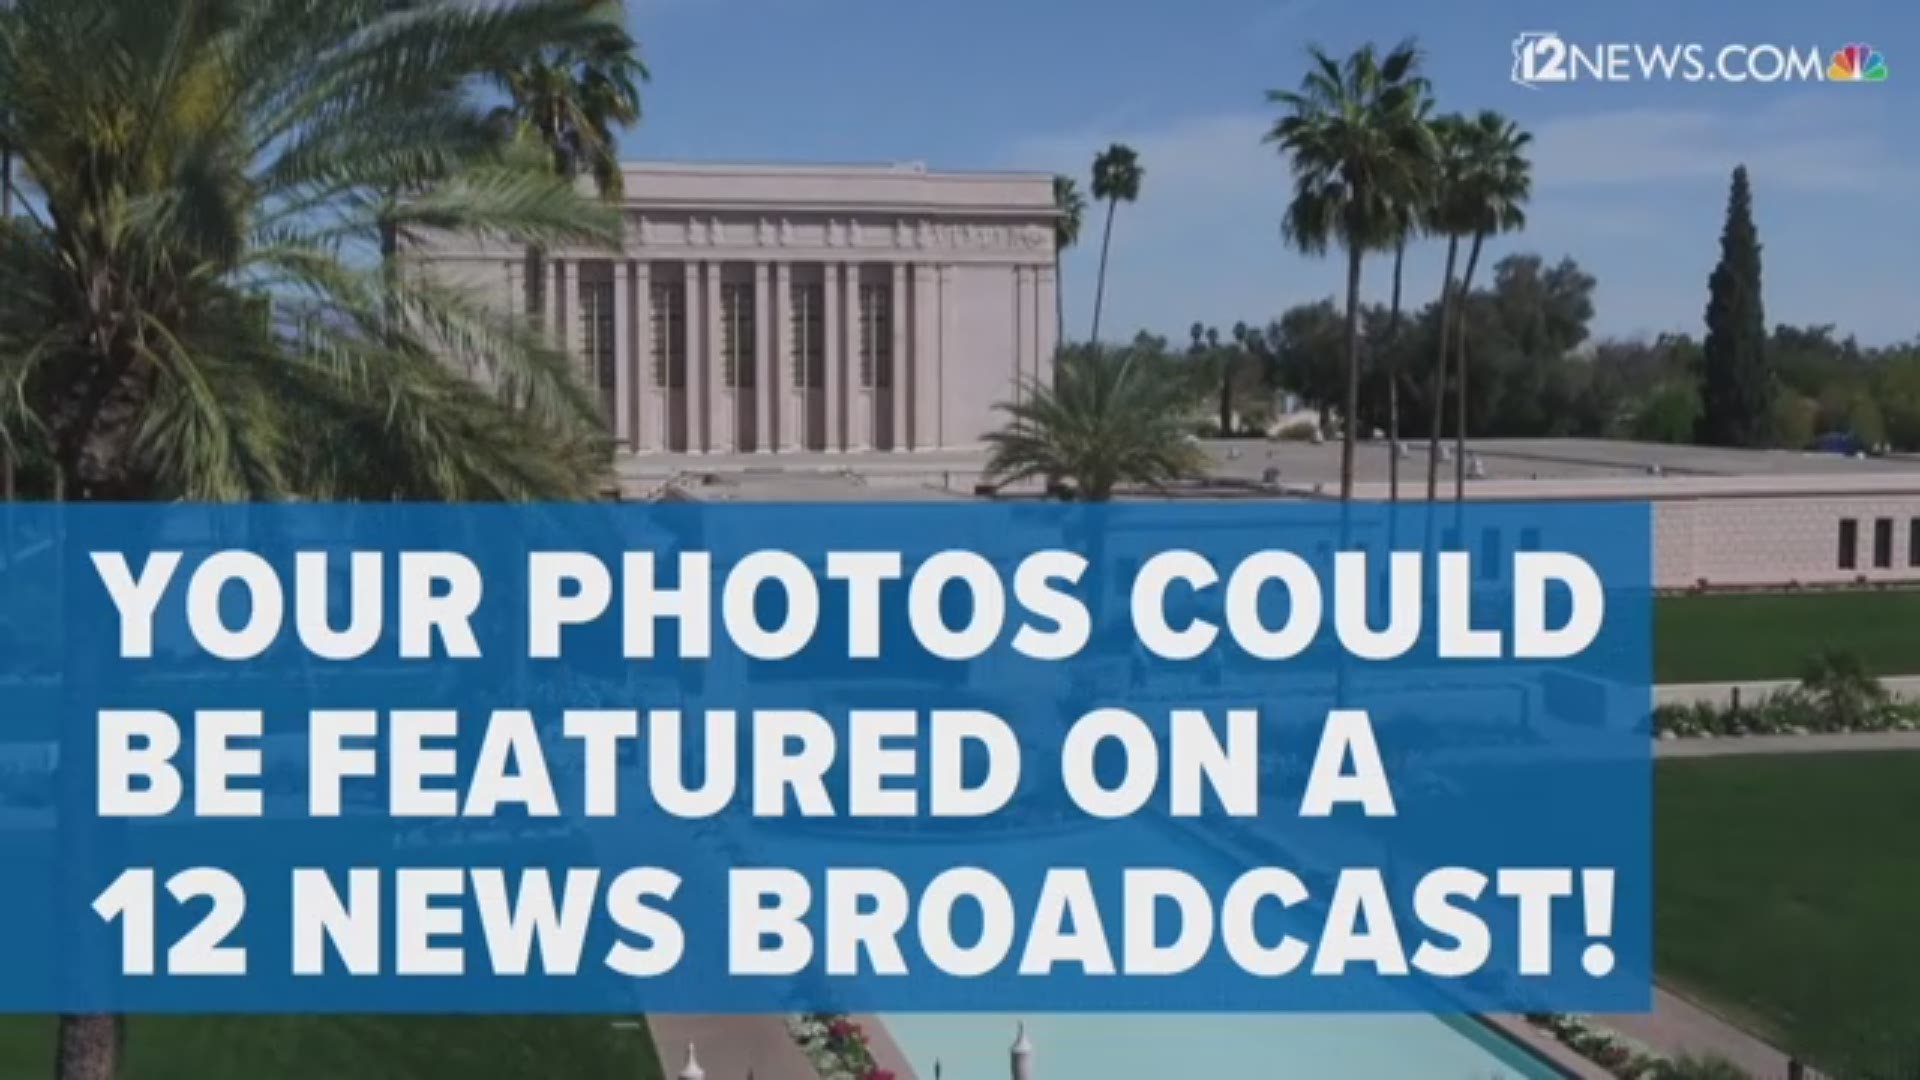 12 News is holding a photo challenge on Instagram for our Everywhere A to Z project and we want to see our viewers' awesome photos.